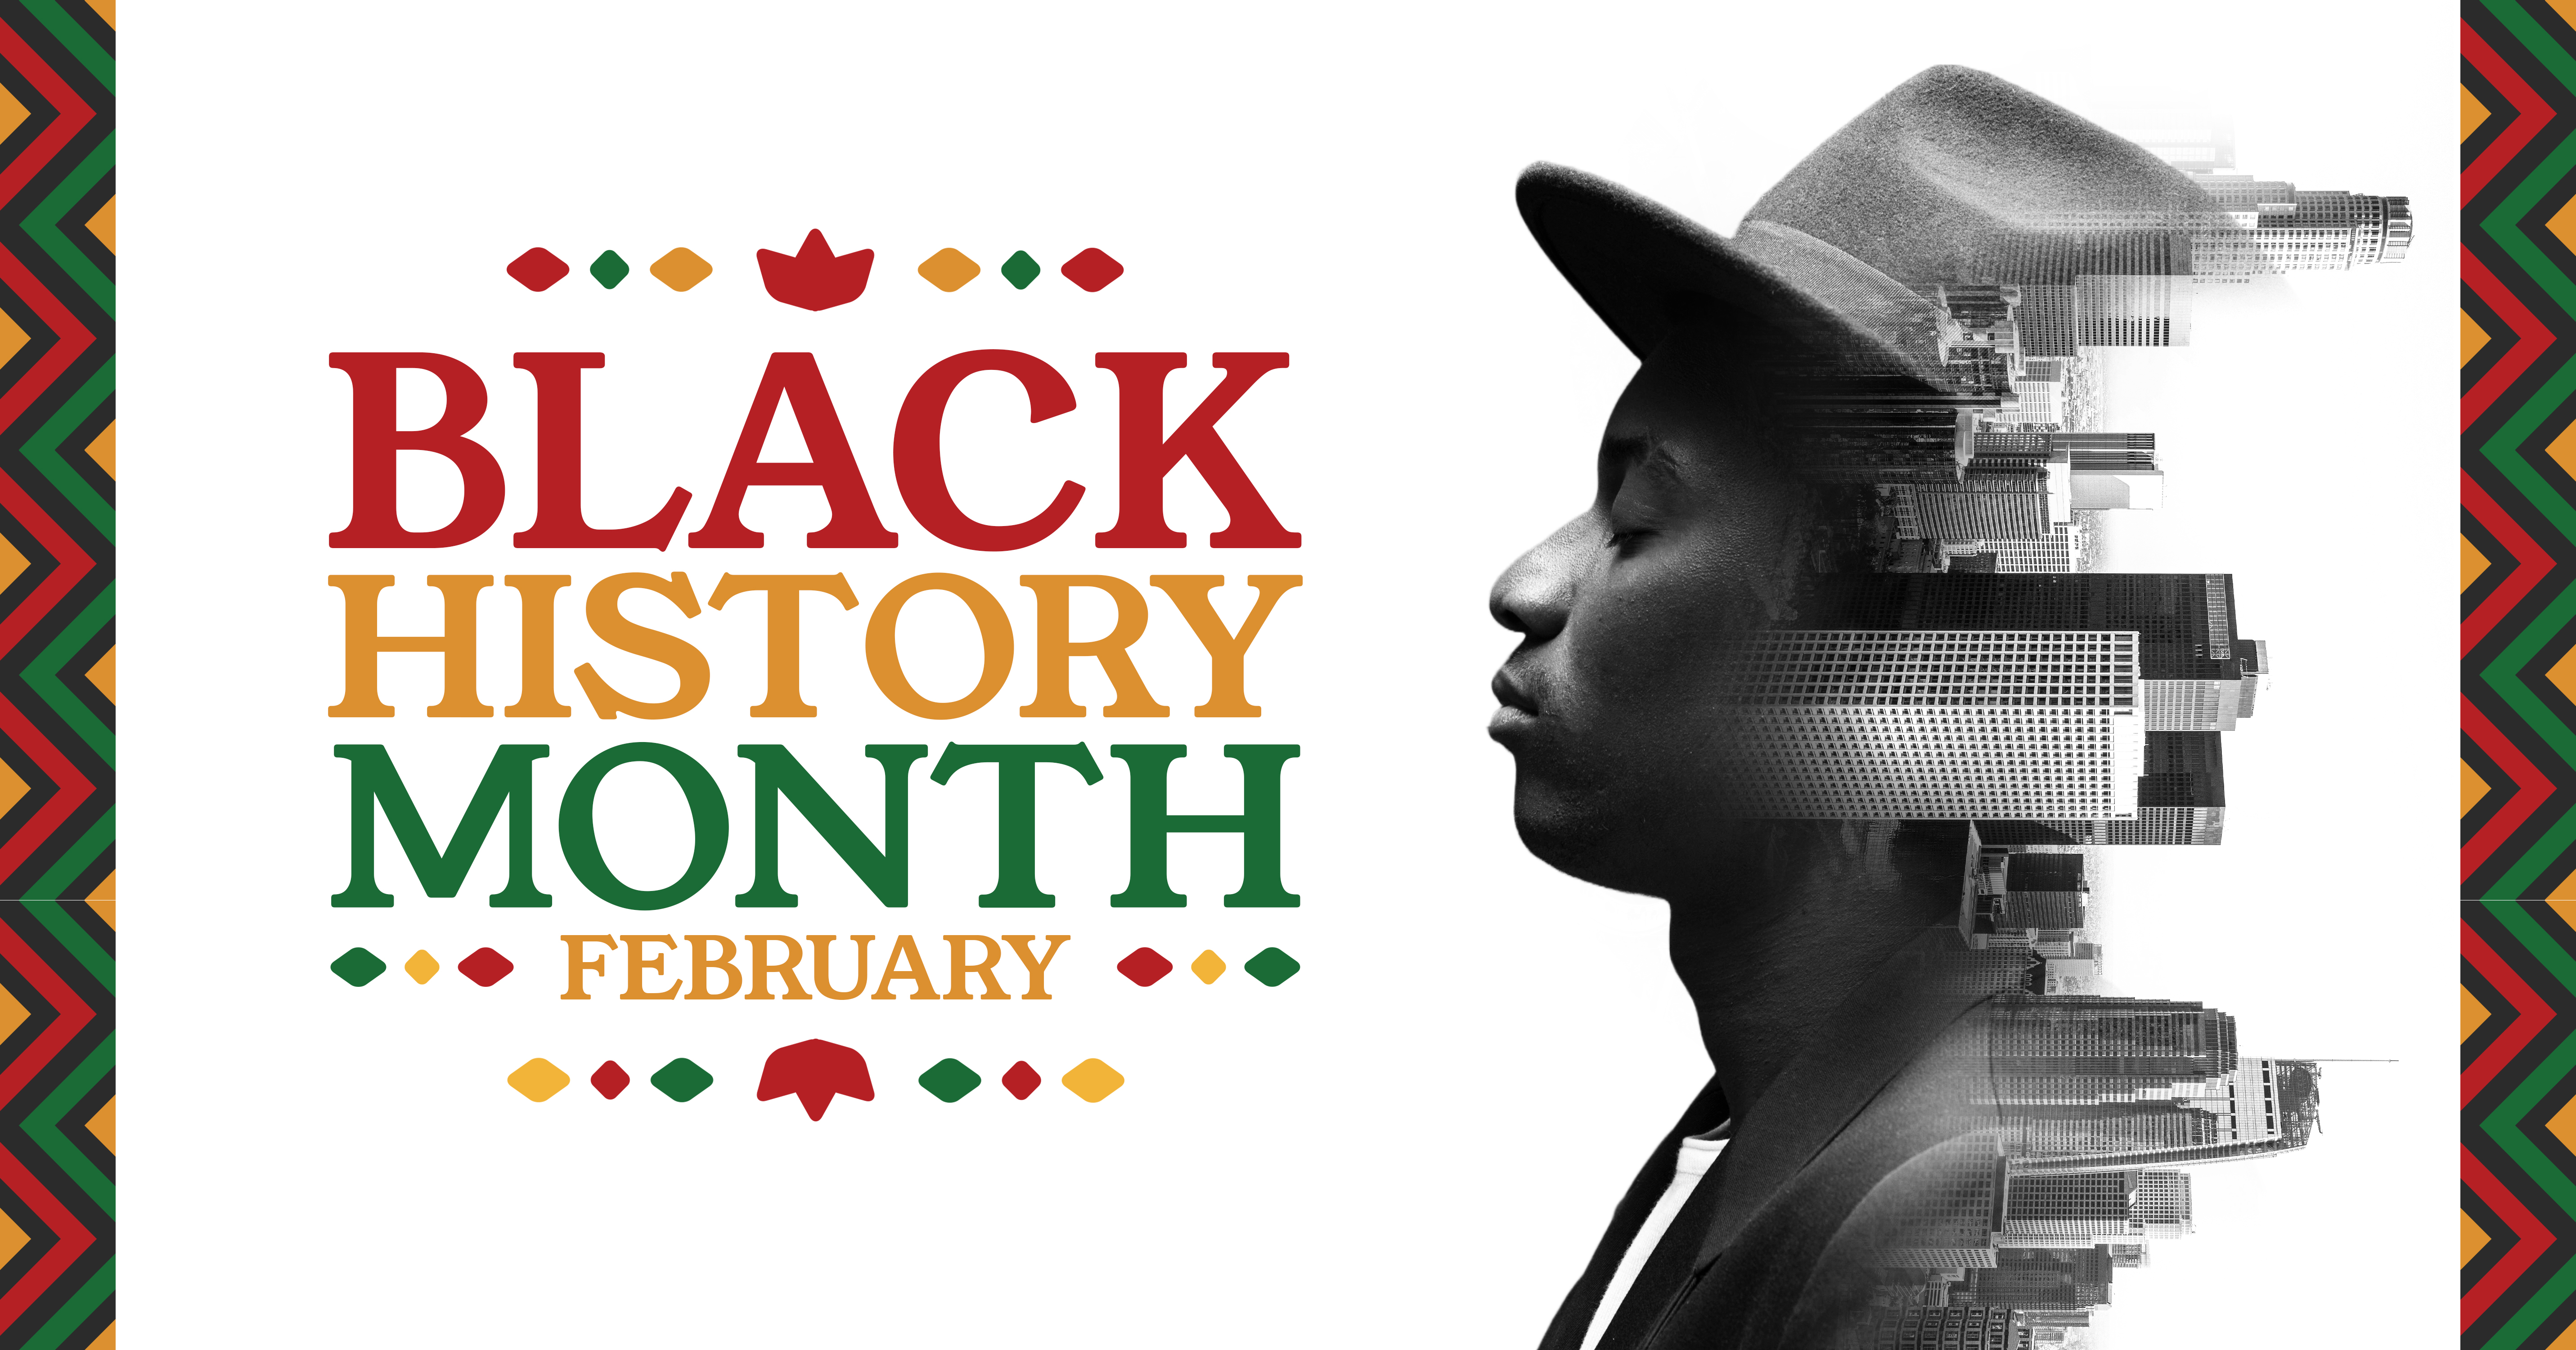 Black History Month collage